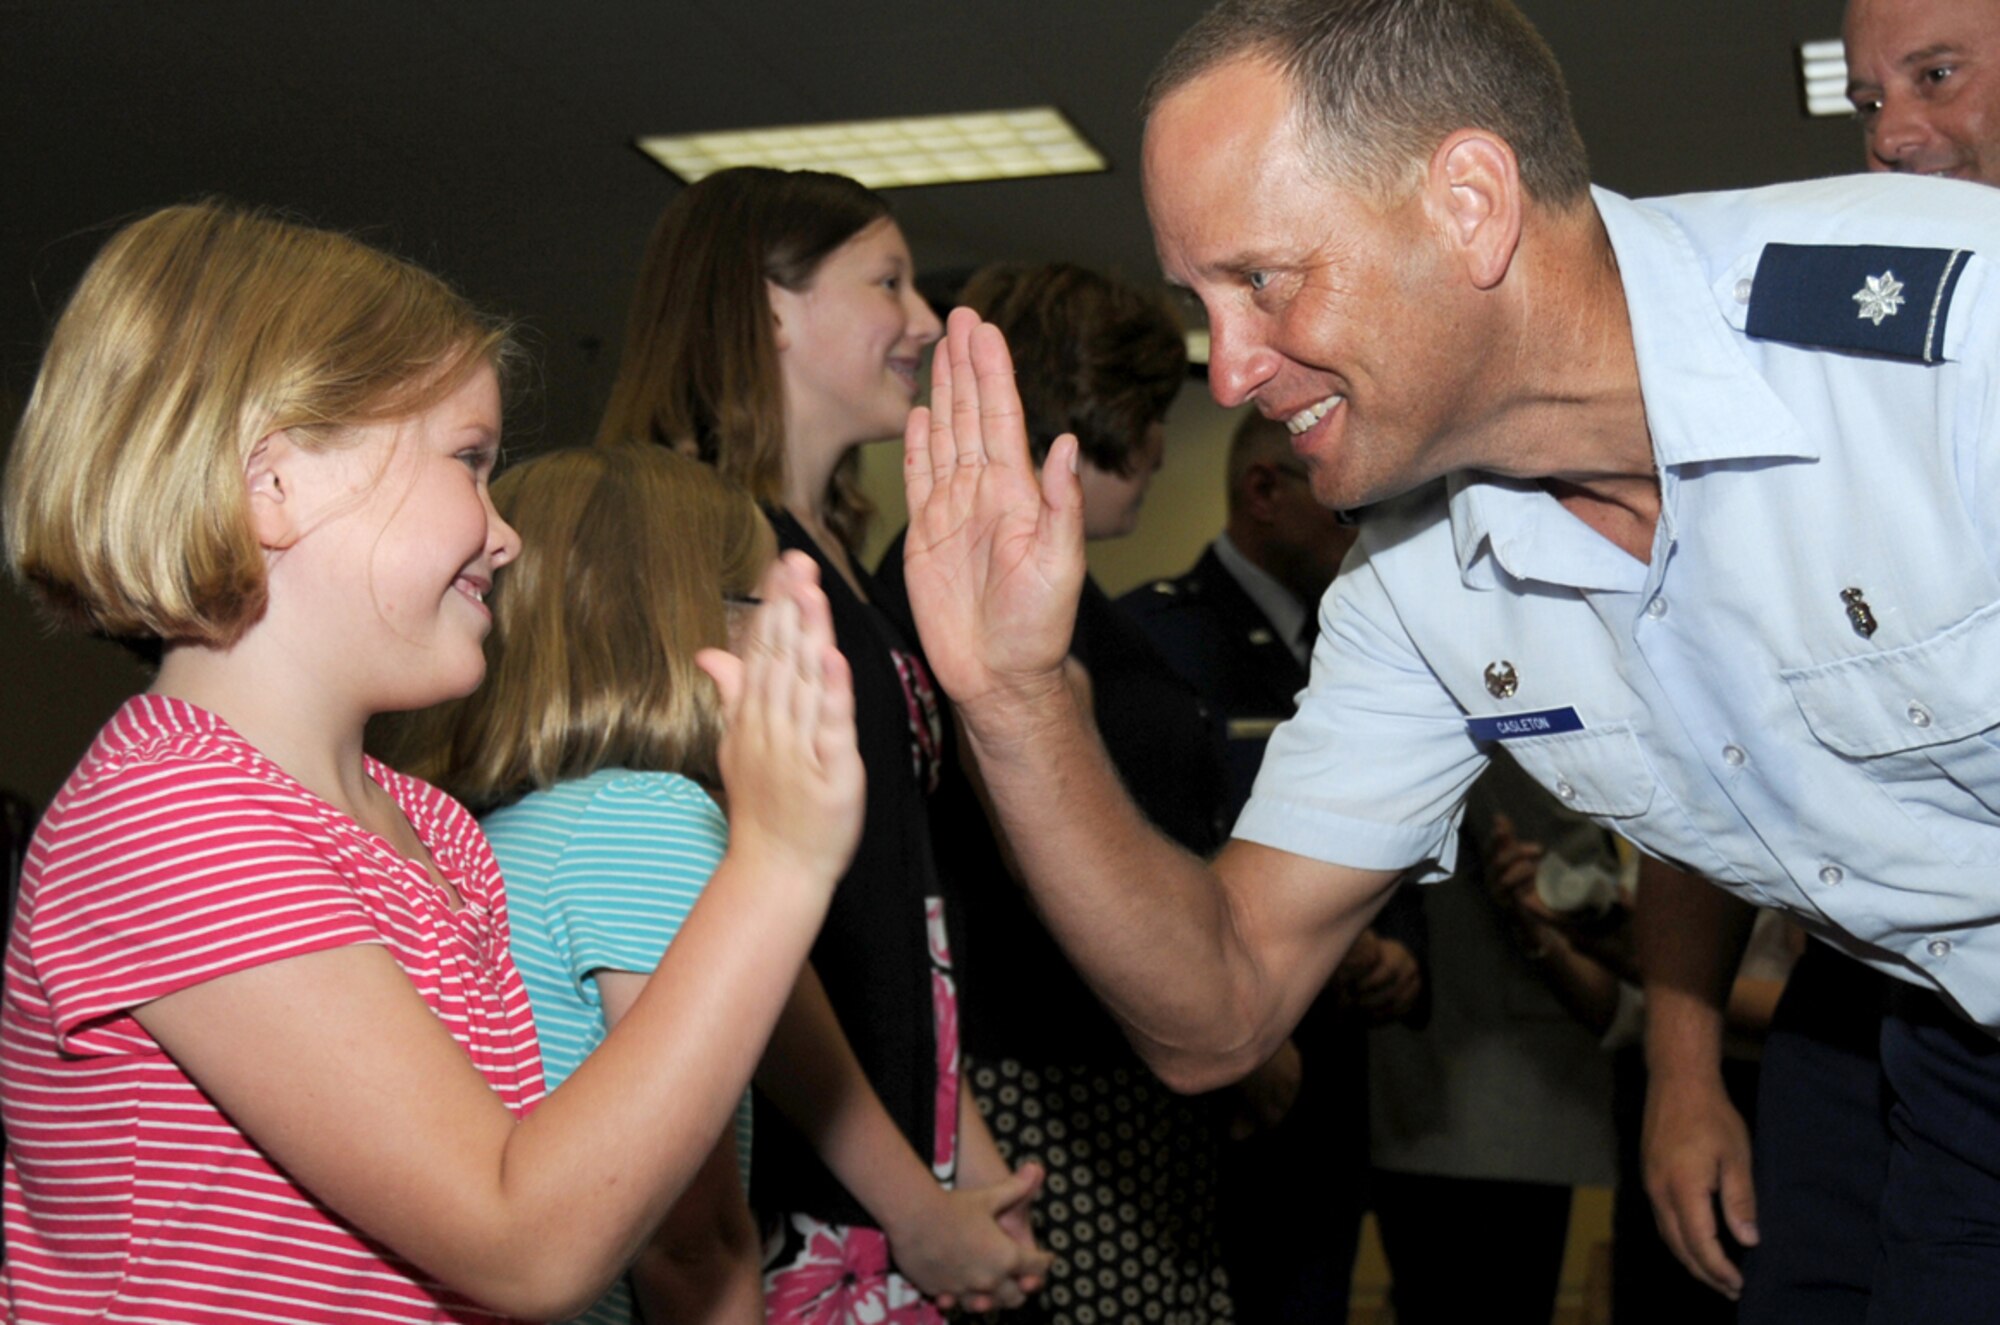 Sophie Mueller, 7, gets a “high five” from Lt. Col. Brian Casleton, 81st Aerospace Medicine Squadron commander, at a reception following the change of command ceremony.  Her sisters are Hailey, 10, and Maurie, 13.  (U.S. Air Force photo by Kemberly Groue)